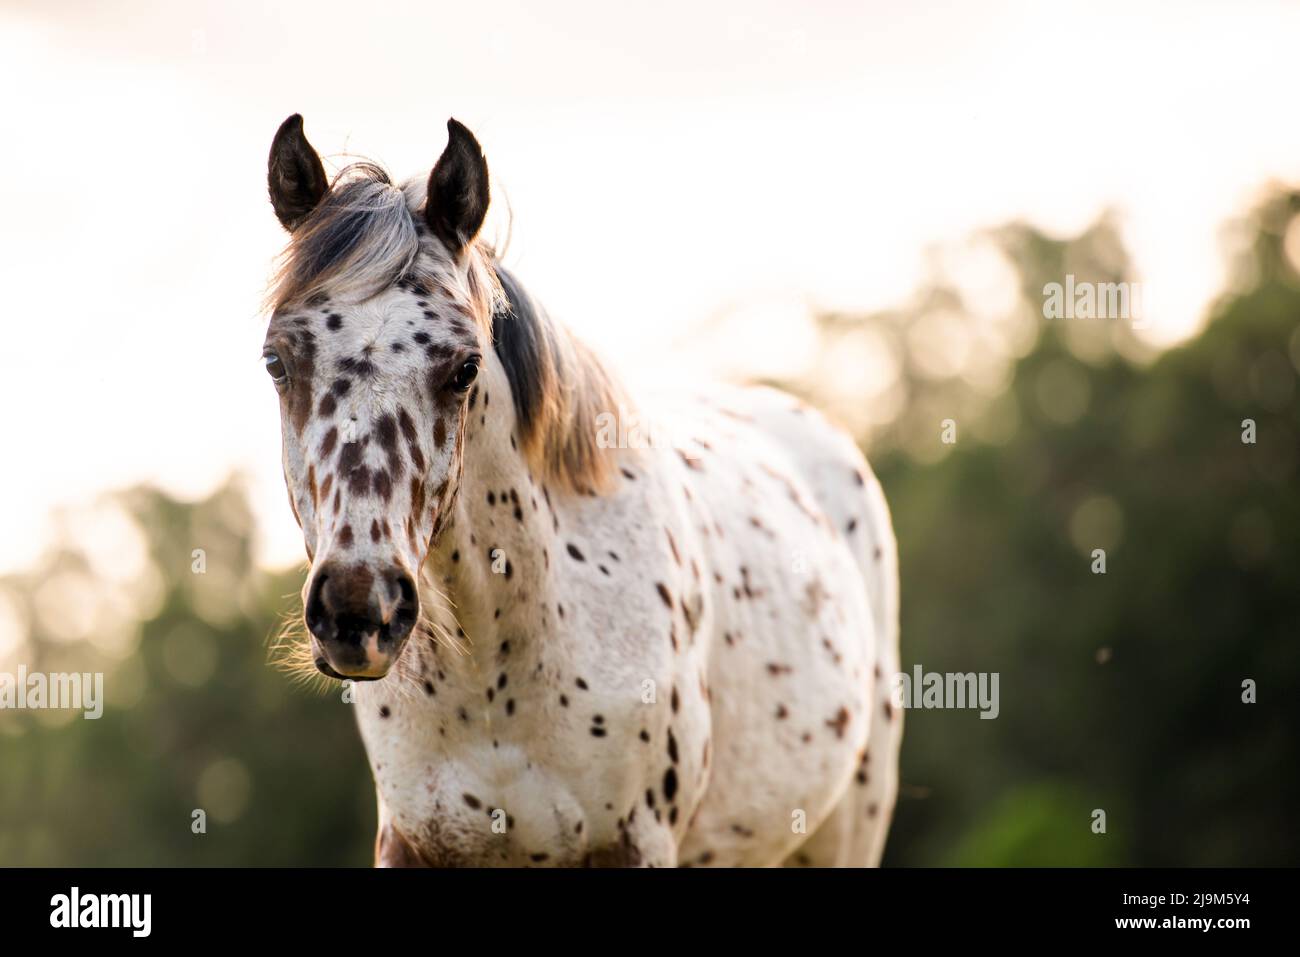 Appaloosa horse in the pasture at sunset, white horse with black and brown spots. yearling baby horse Stock Photo